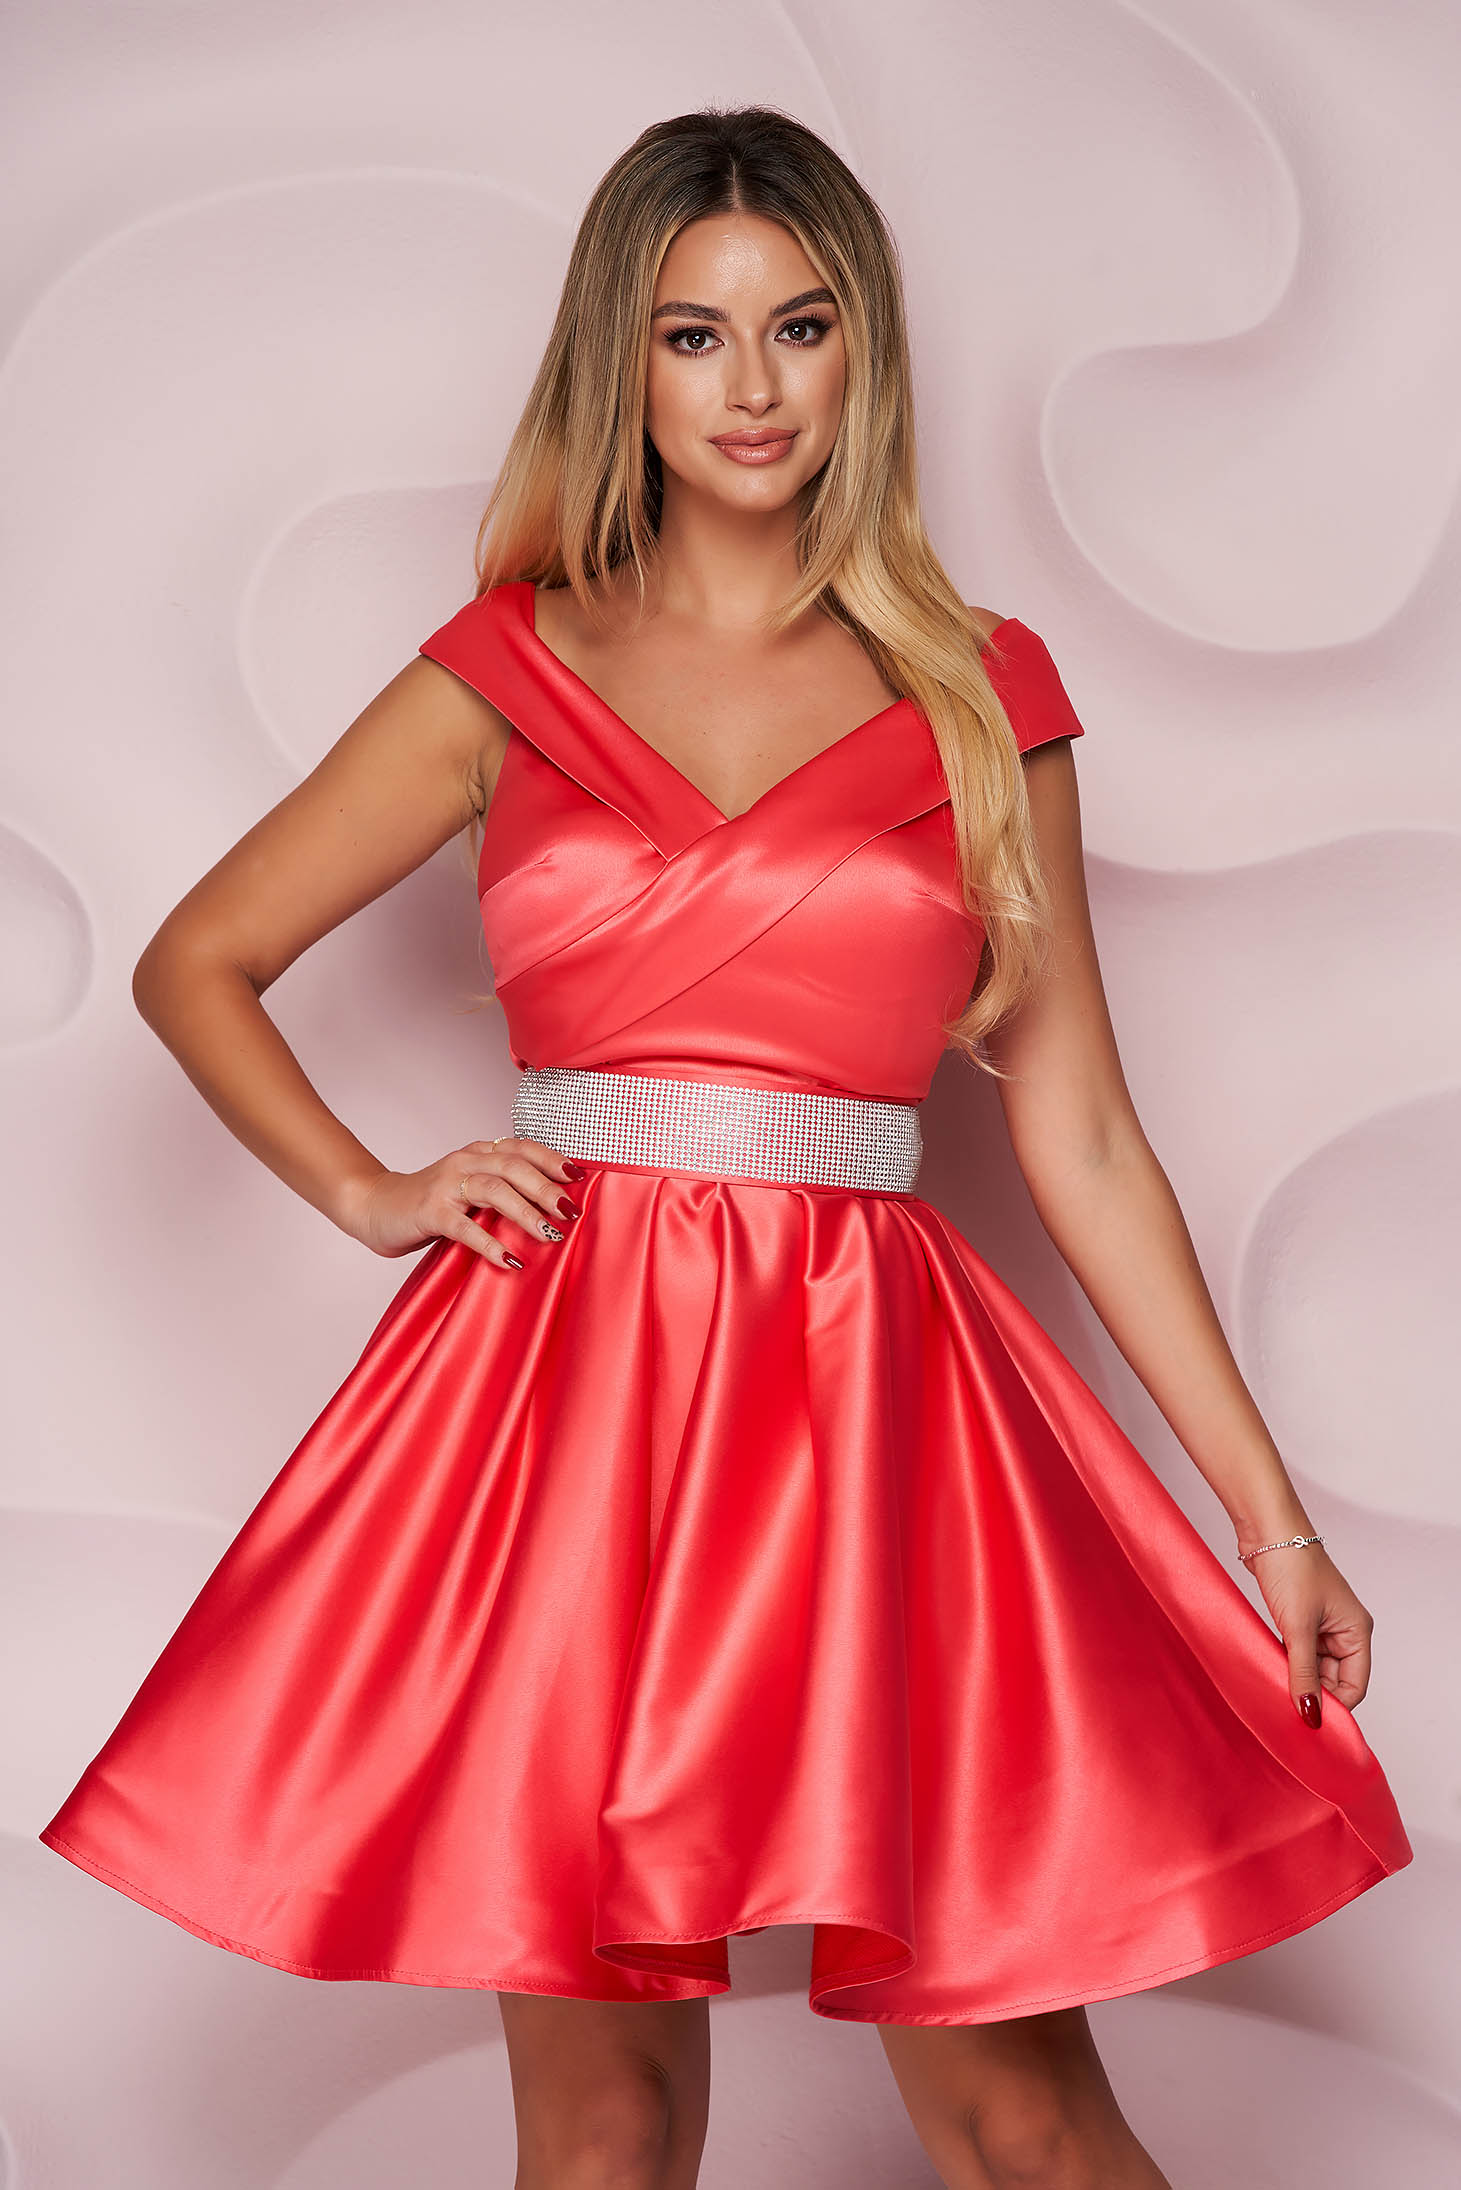 Coral dress from satin cloche occasional on the shoulders short cut